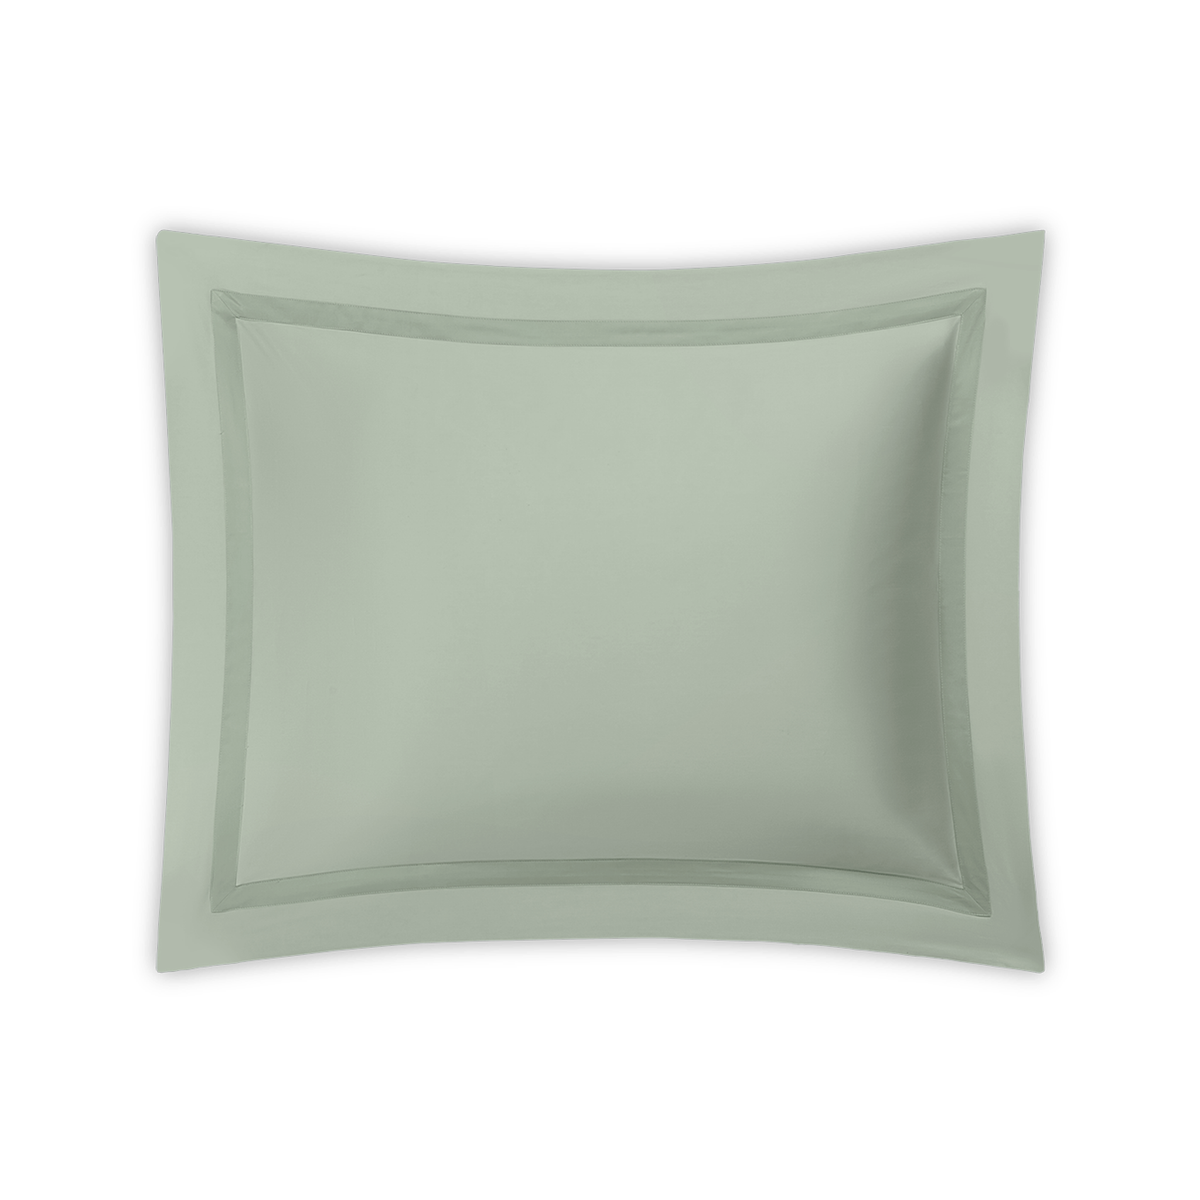 Sham of Matouk Nocturne Bedding Collection in Color Celadon